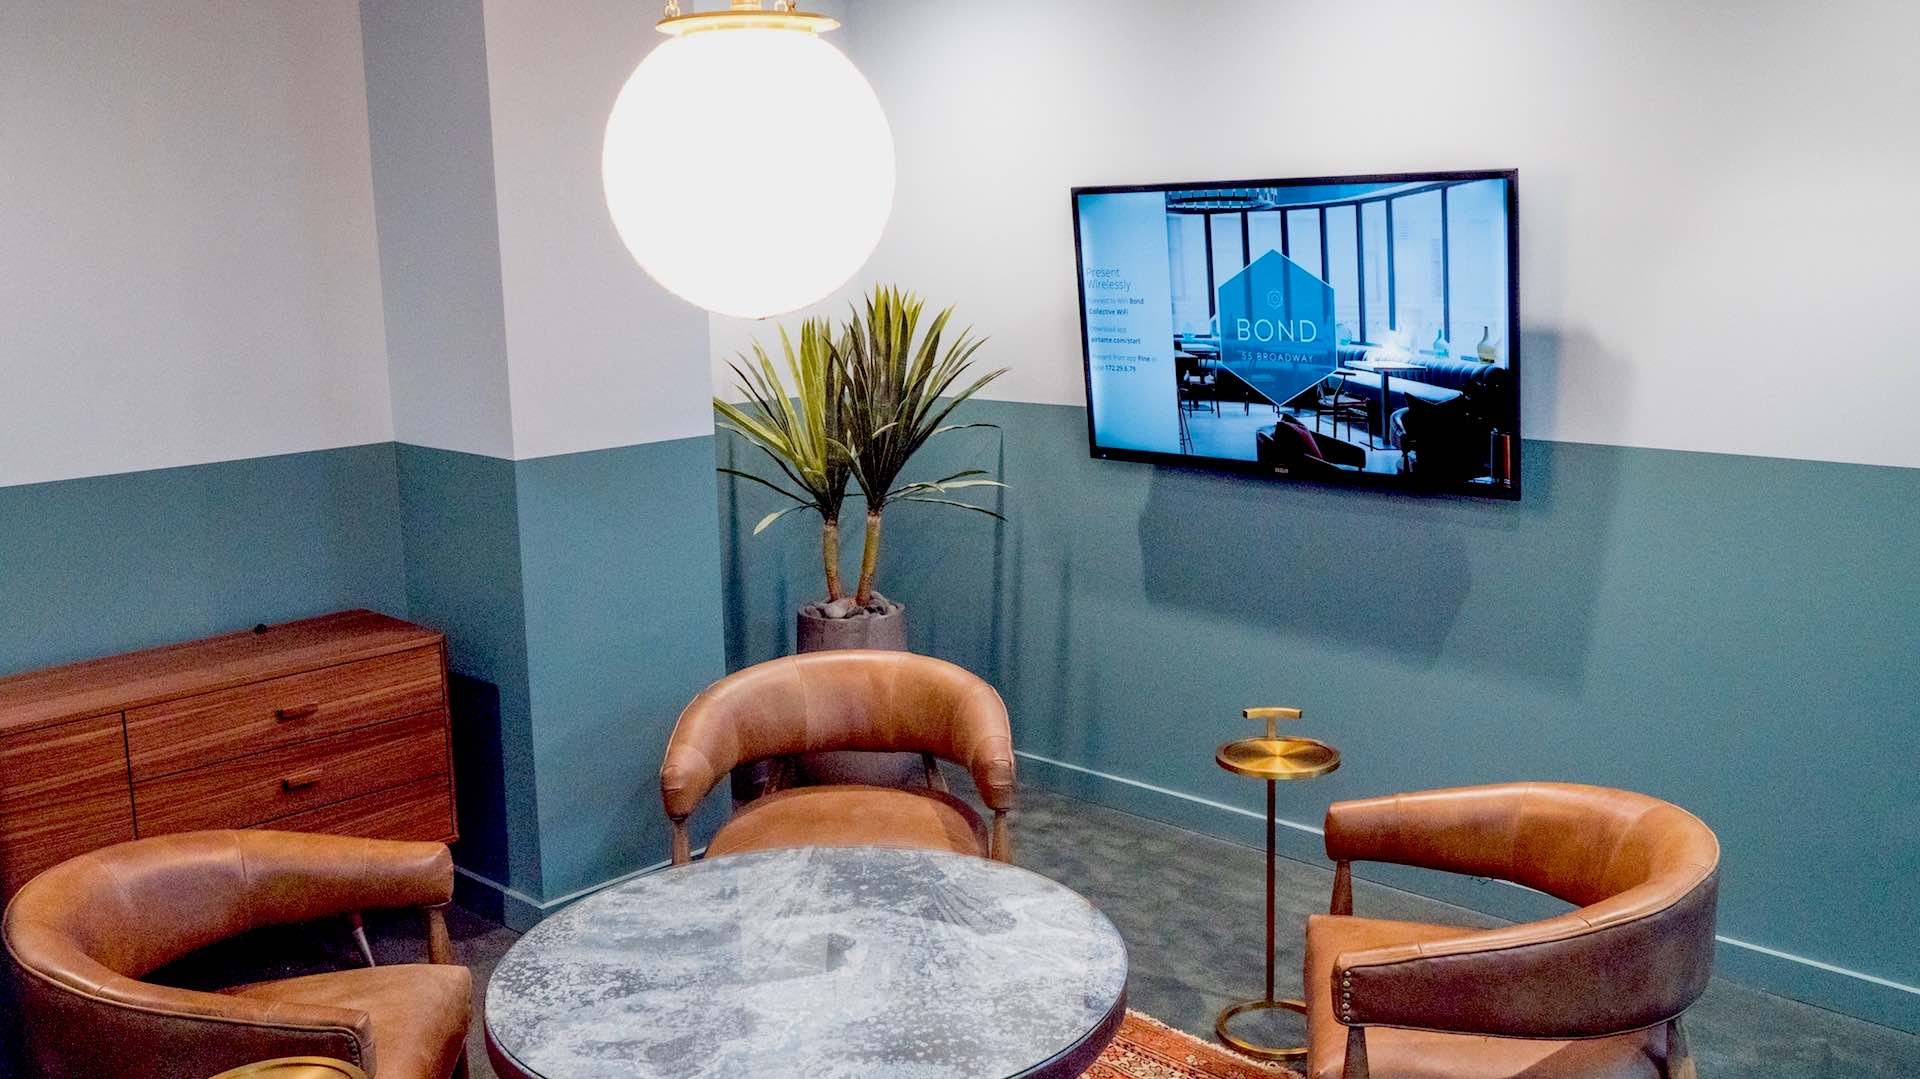 Digital signage deployment in a lounge area